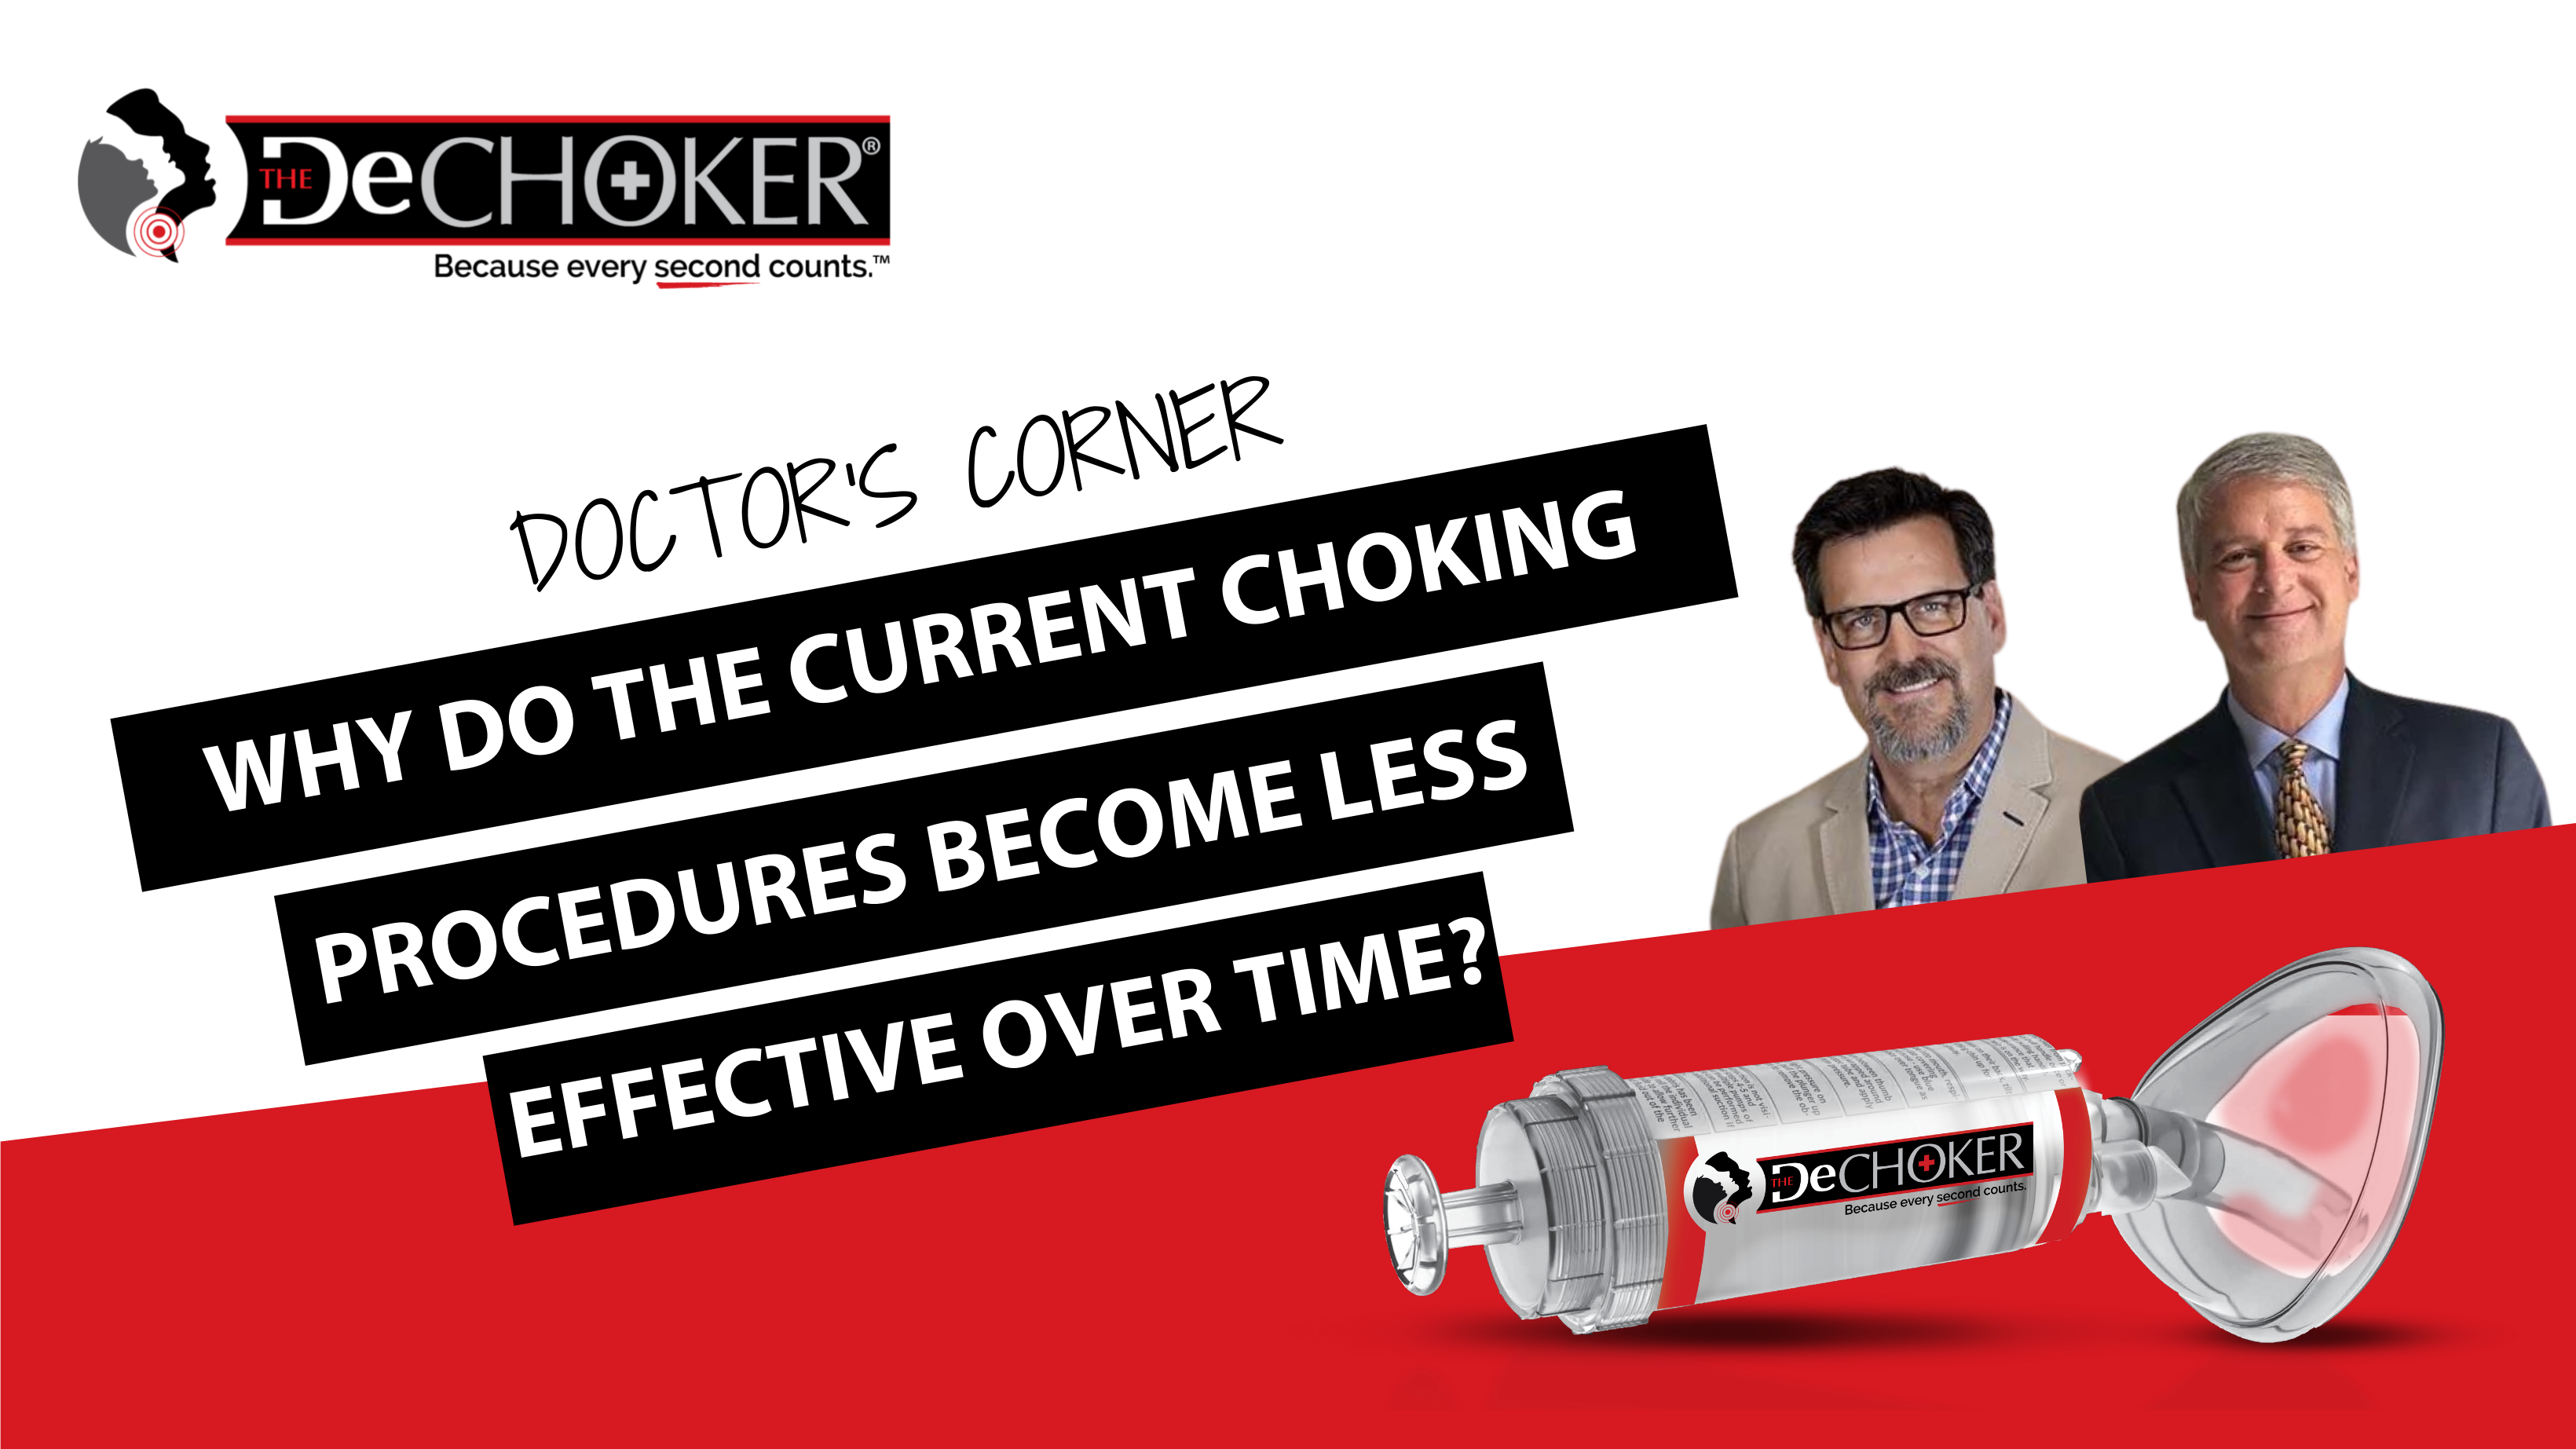 Why do the current choking procedures become less effective over time?